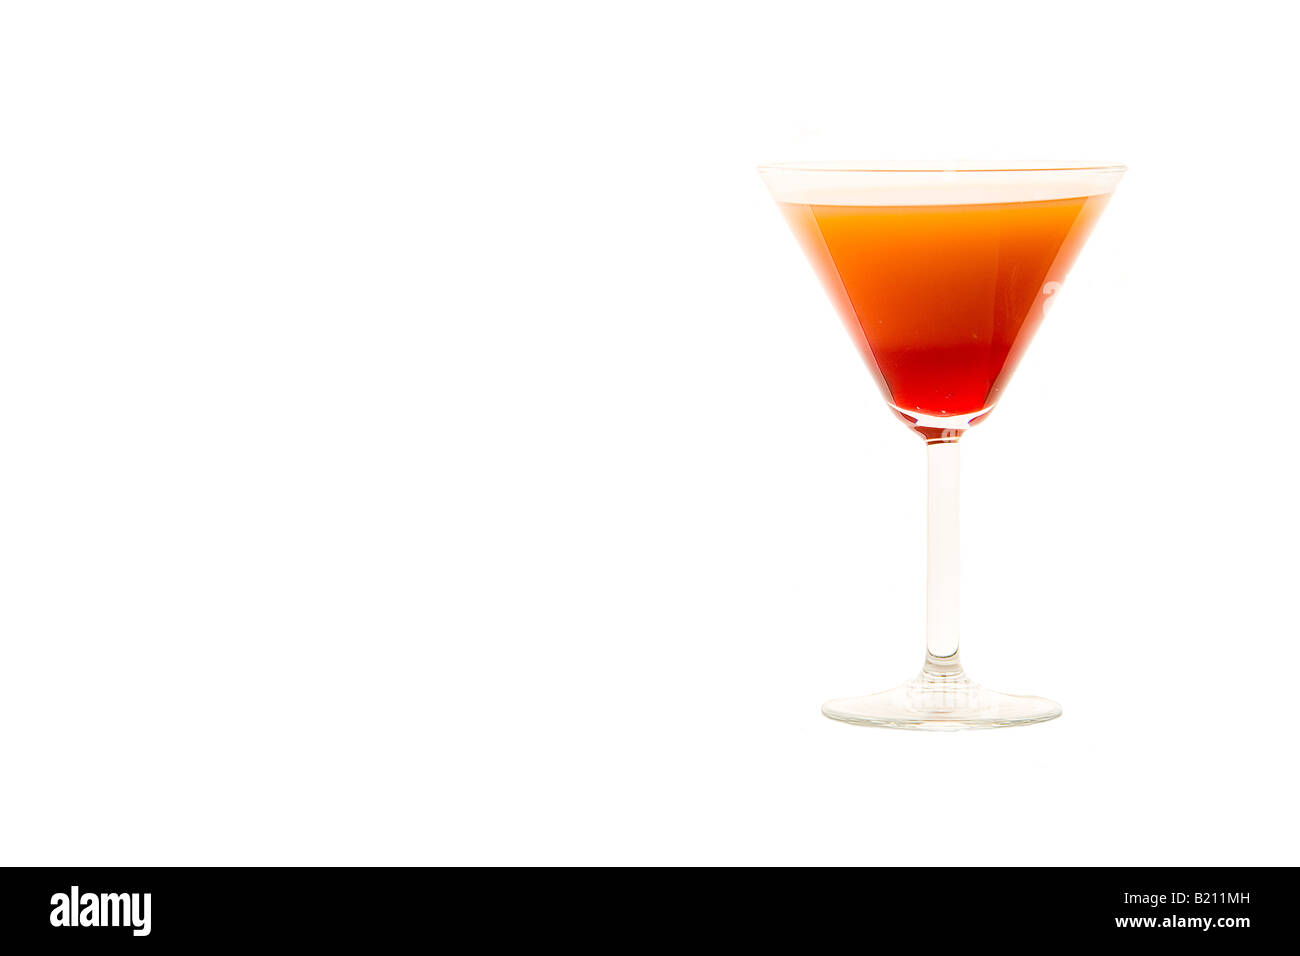 Cocktail (tequila sunrise) with room for text Landscape format perfect for advertising Stock Photo